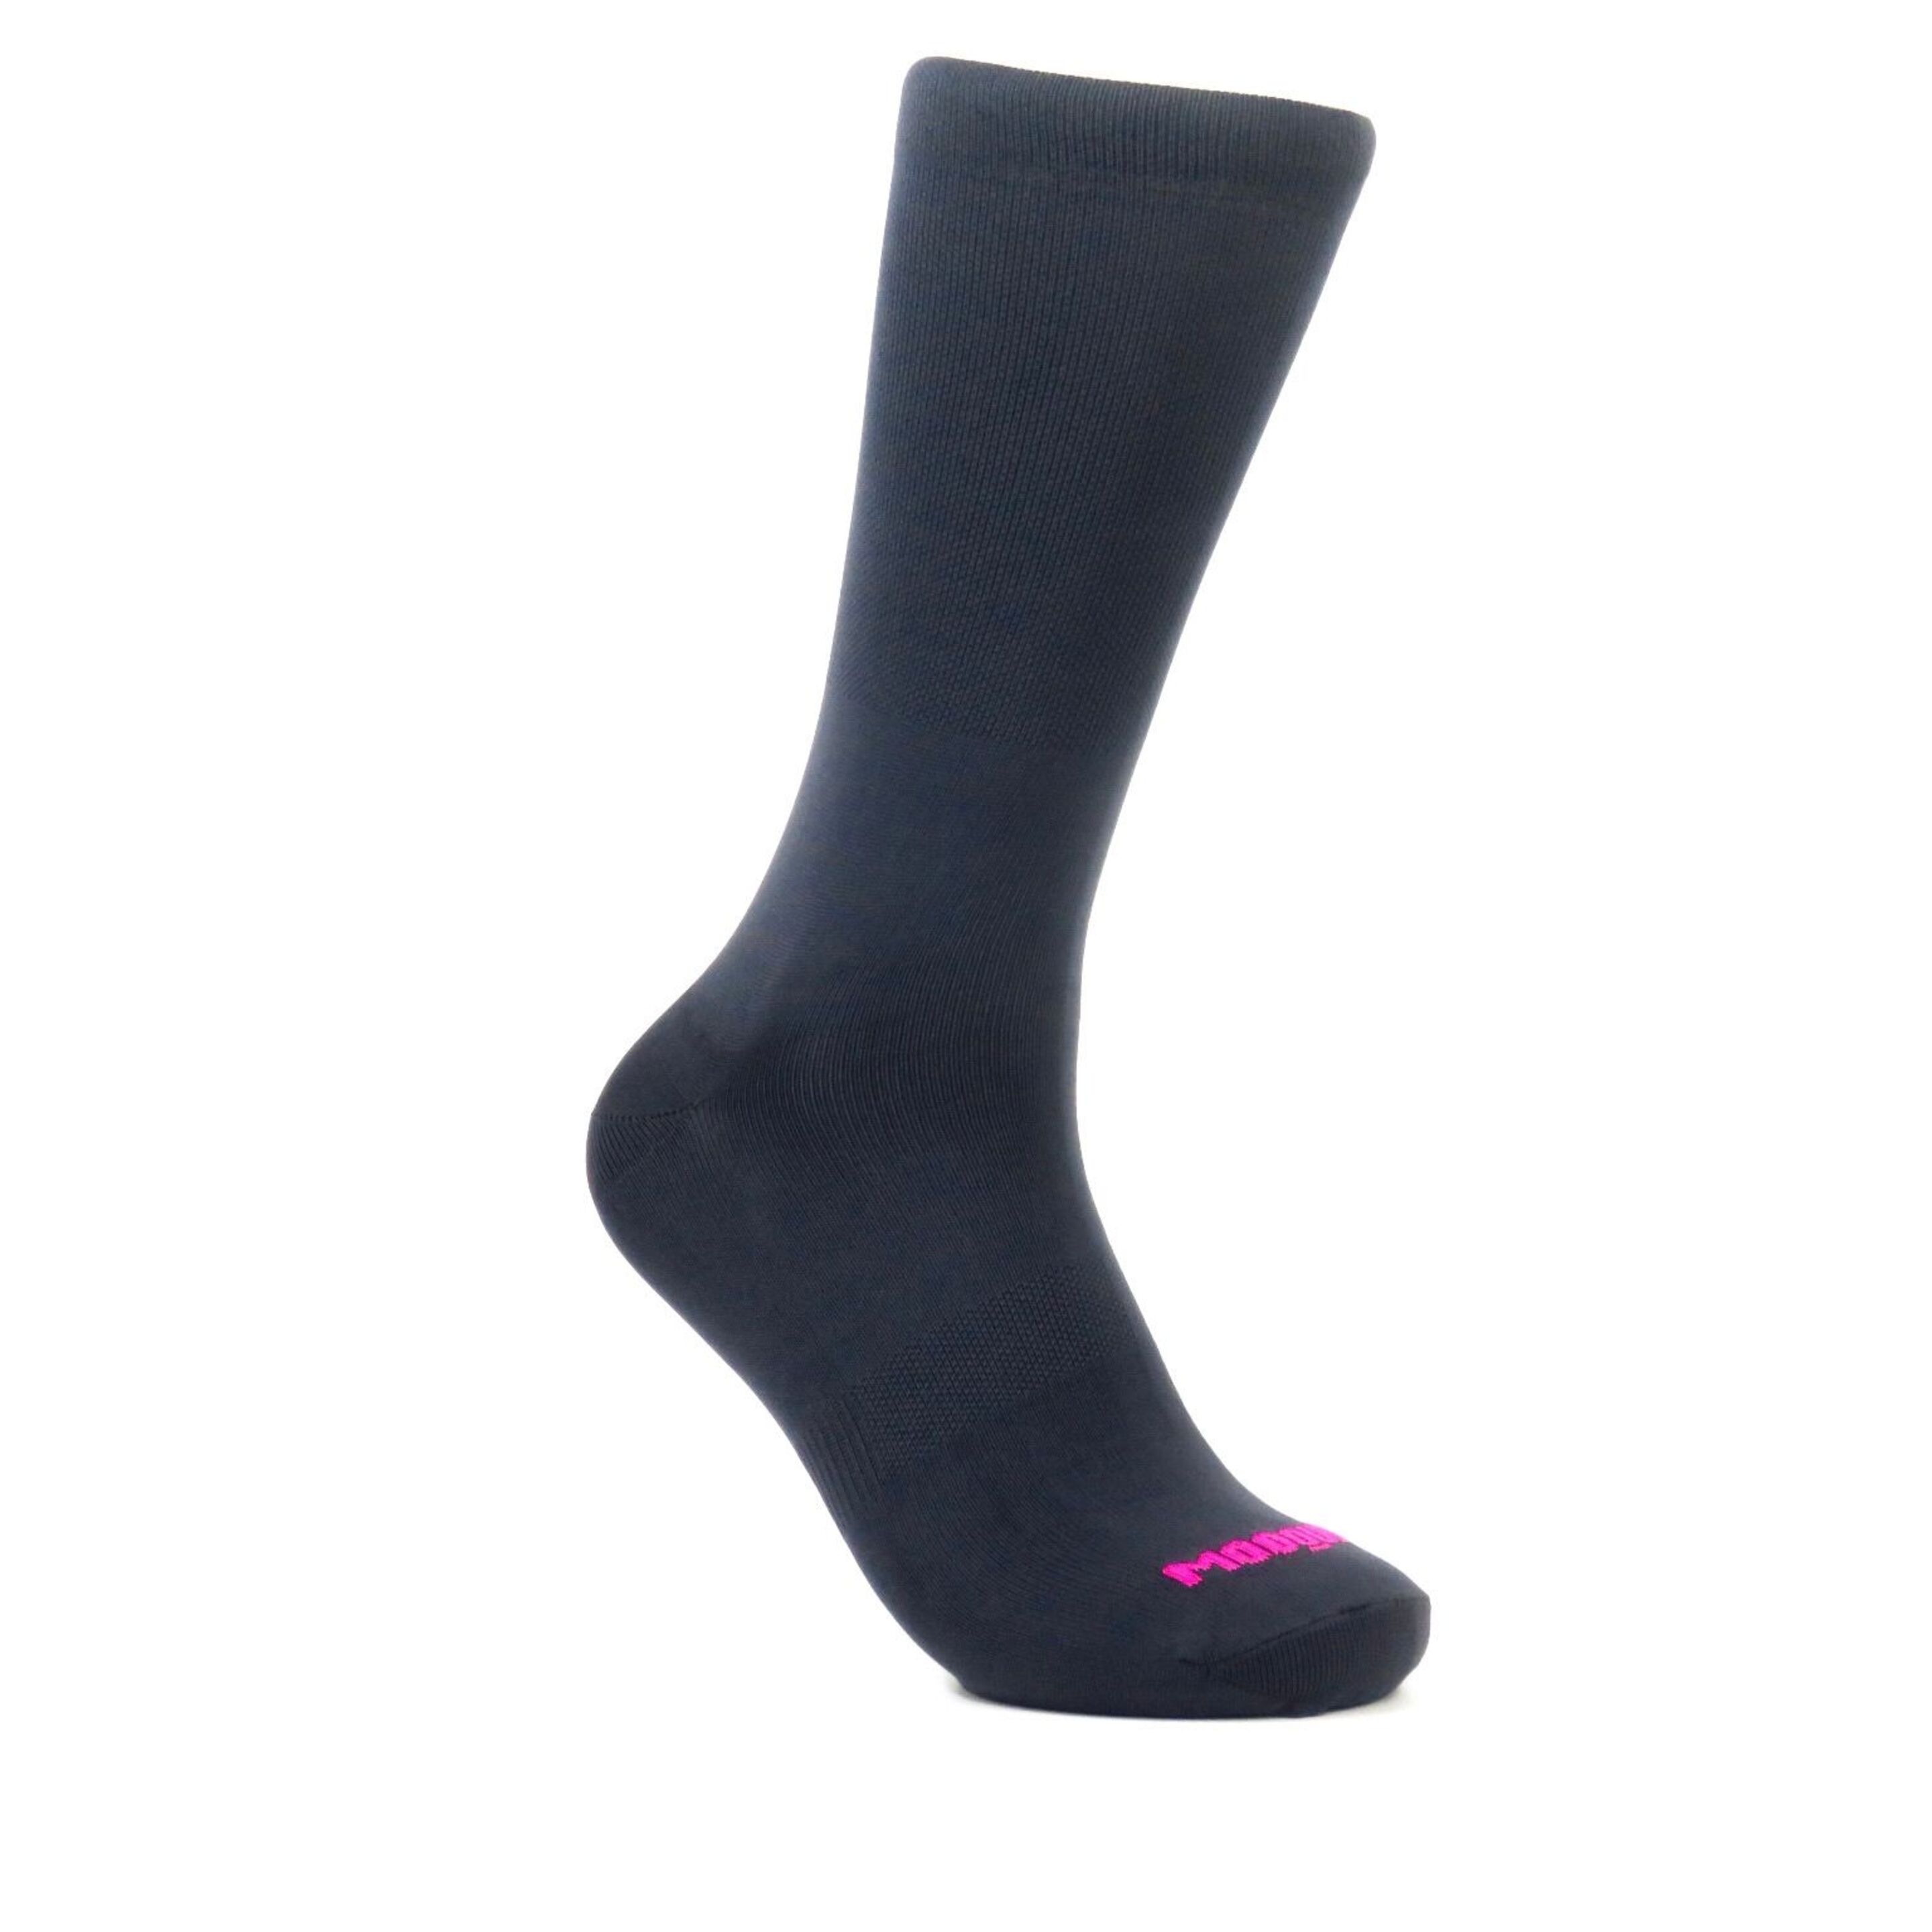 Calcetines Ciclismo Mooquer Classy Pinkgrey